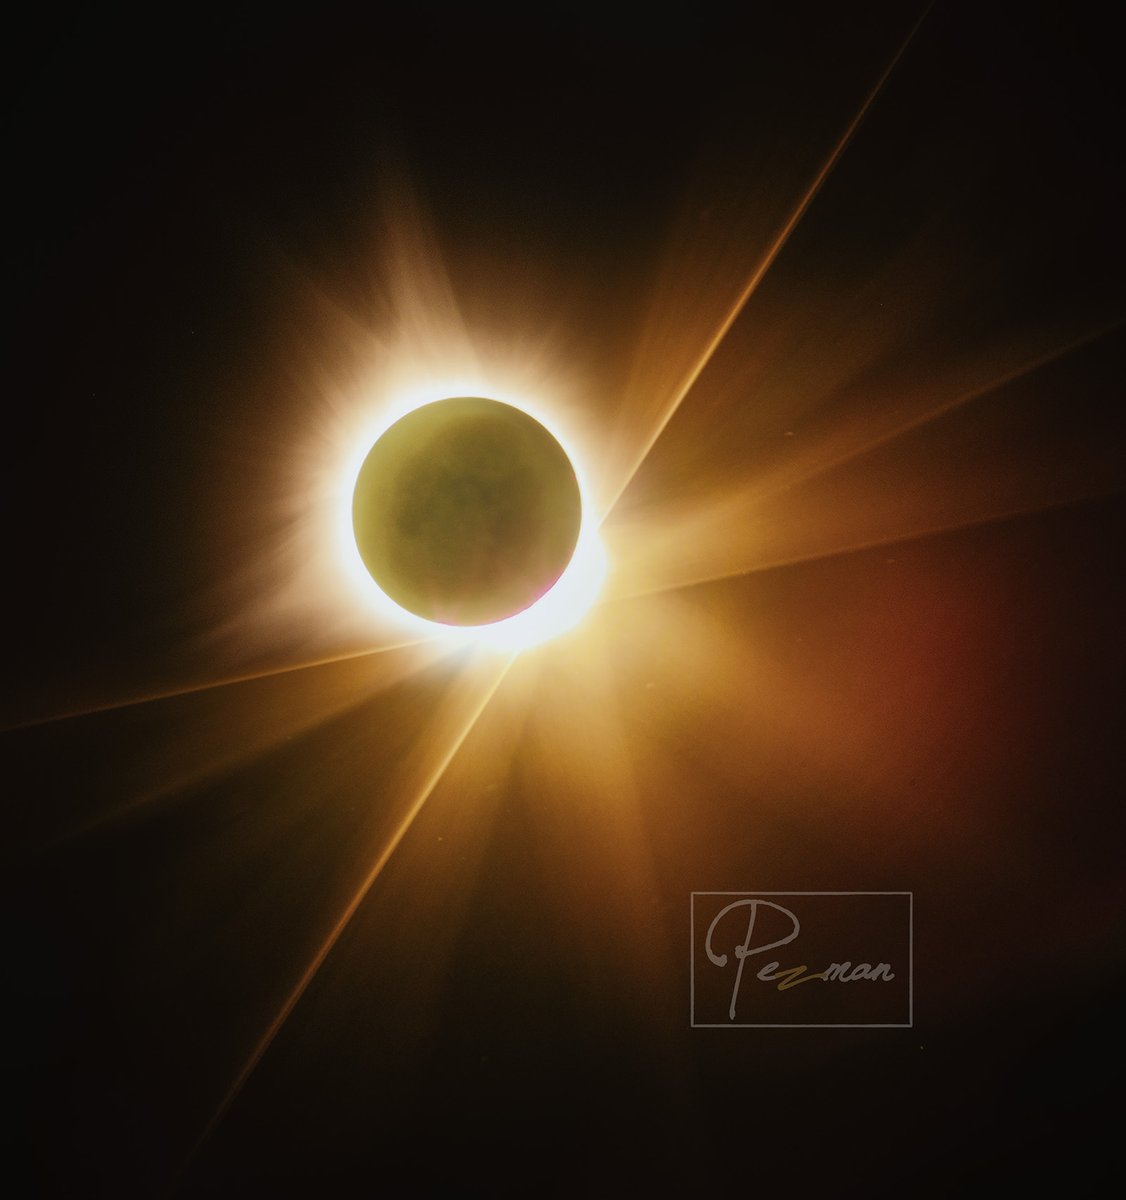 'This is my Eclipse photo. There are many like it but this one is mine. My eclipse photo is my best friend' - Private Pyle probably Captured with the Fuji GFX 50s camera ISO 100 f16 @ 1/60th sec 500mm